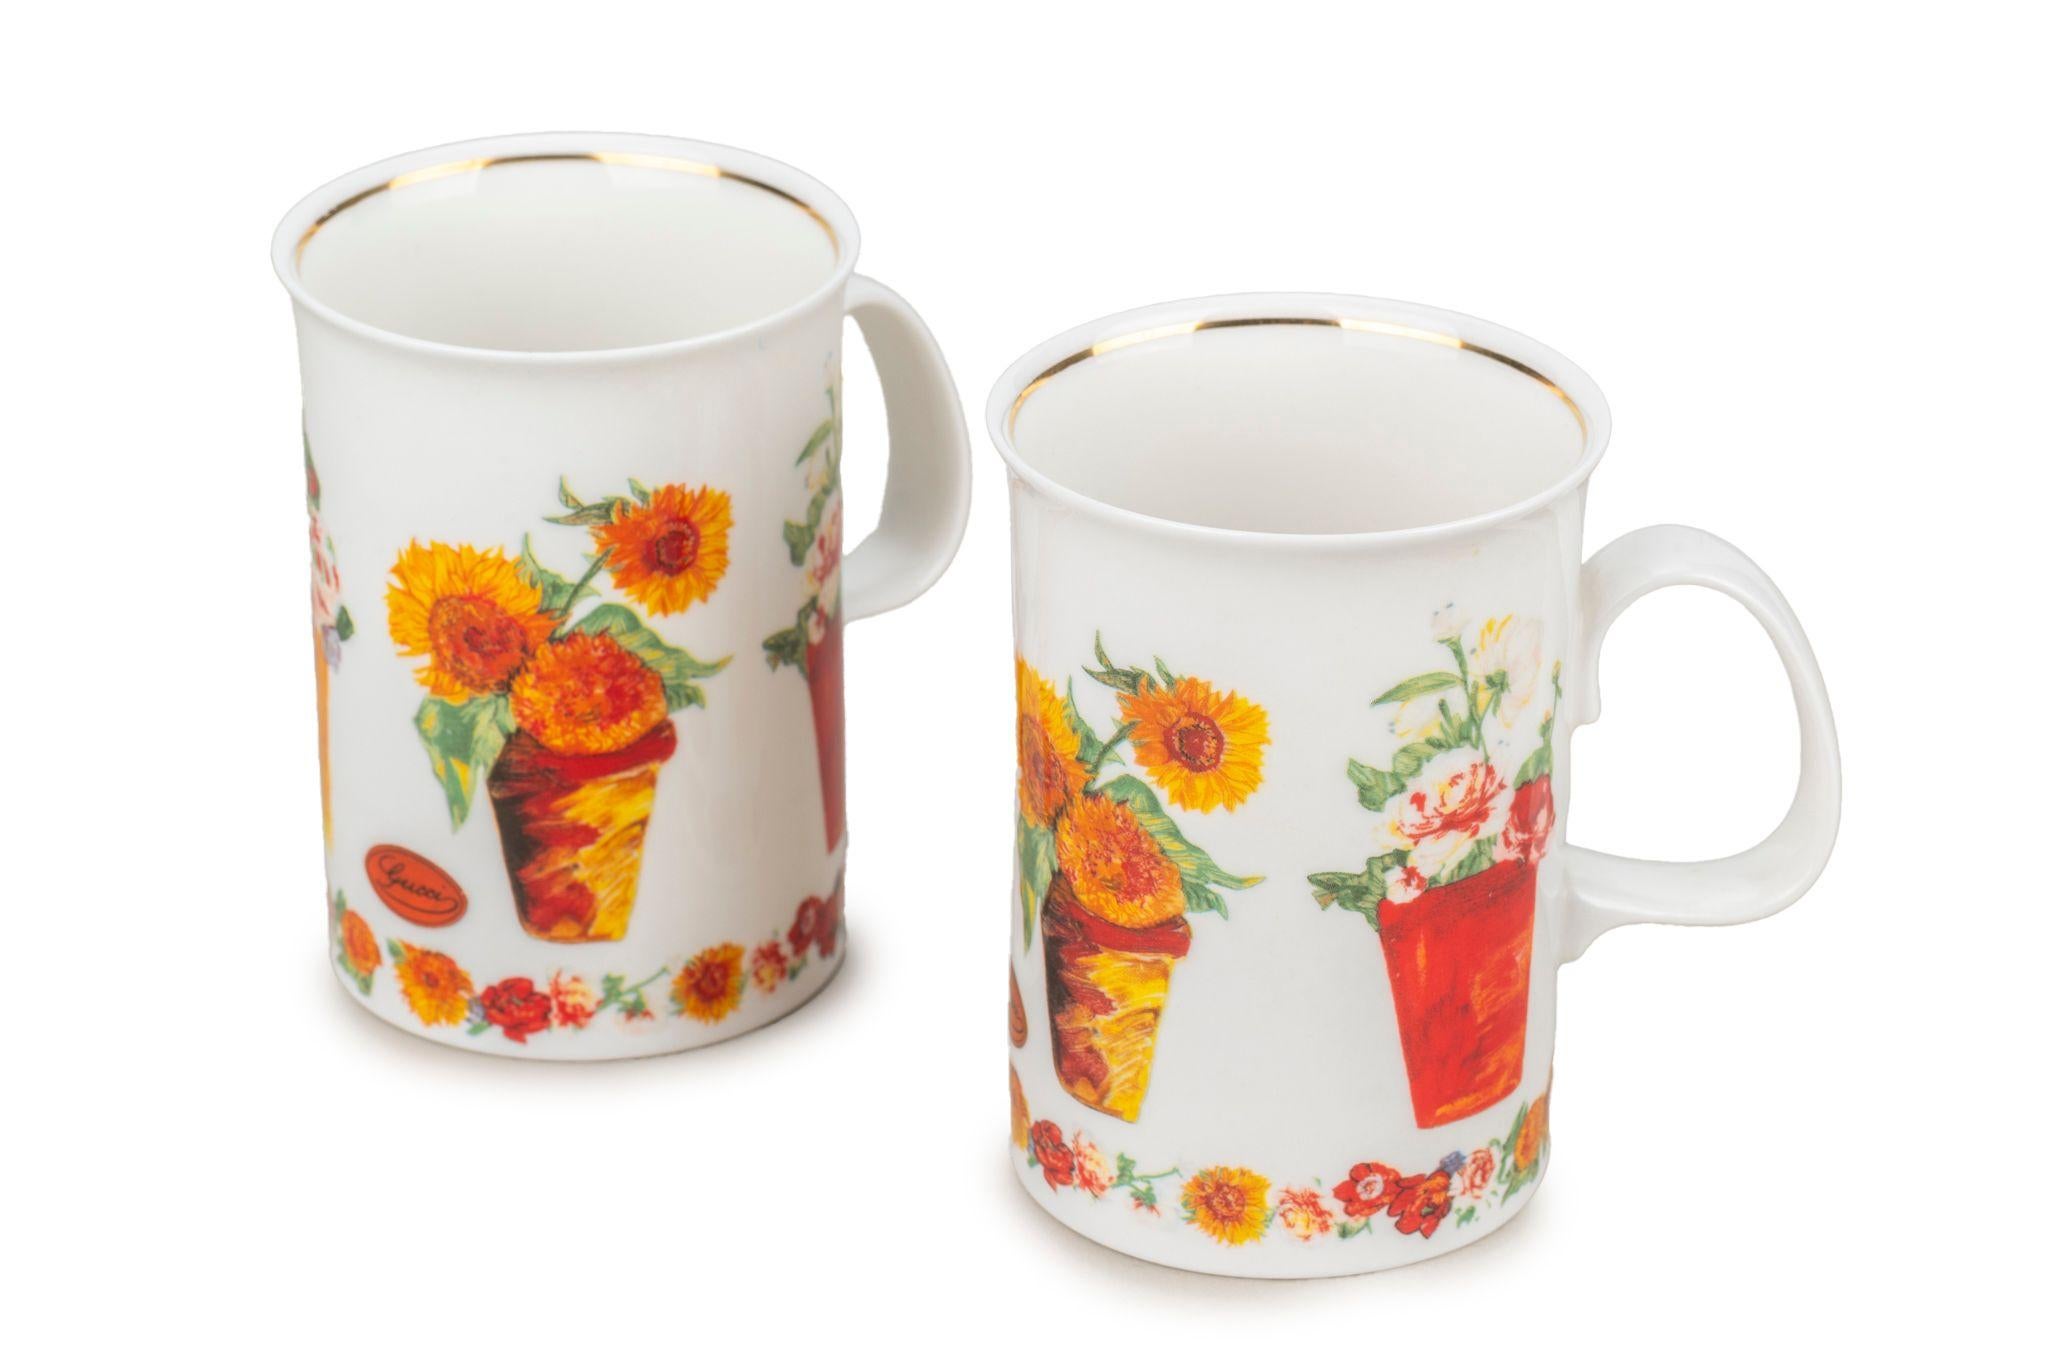 Gucci set of 2 porcelain flower vases tea cups, white, red, yellow. Excellent condition.